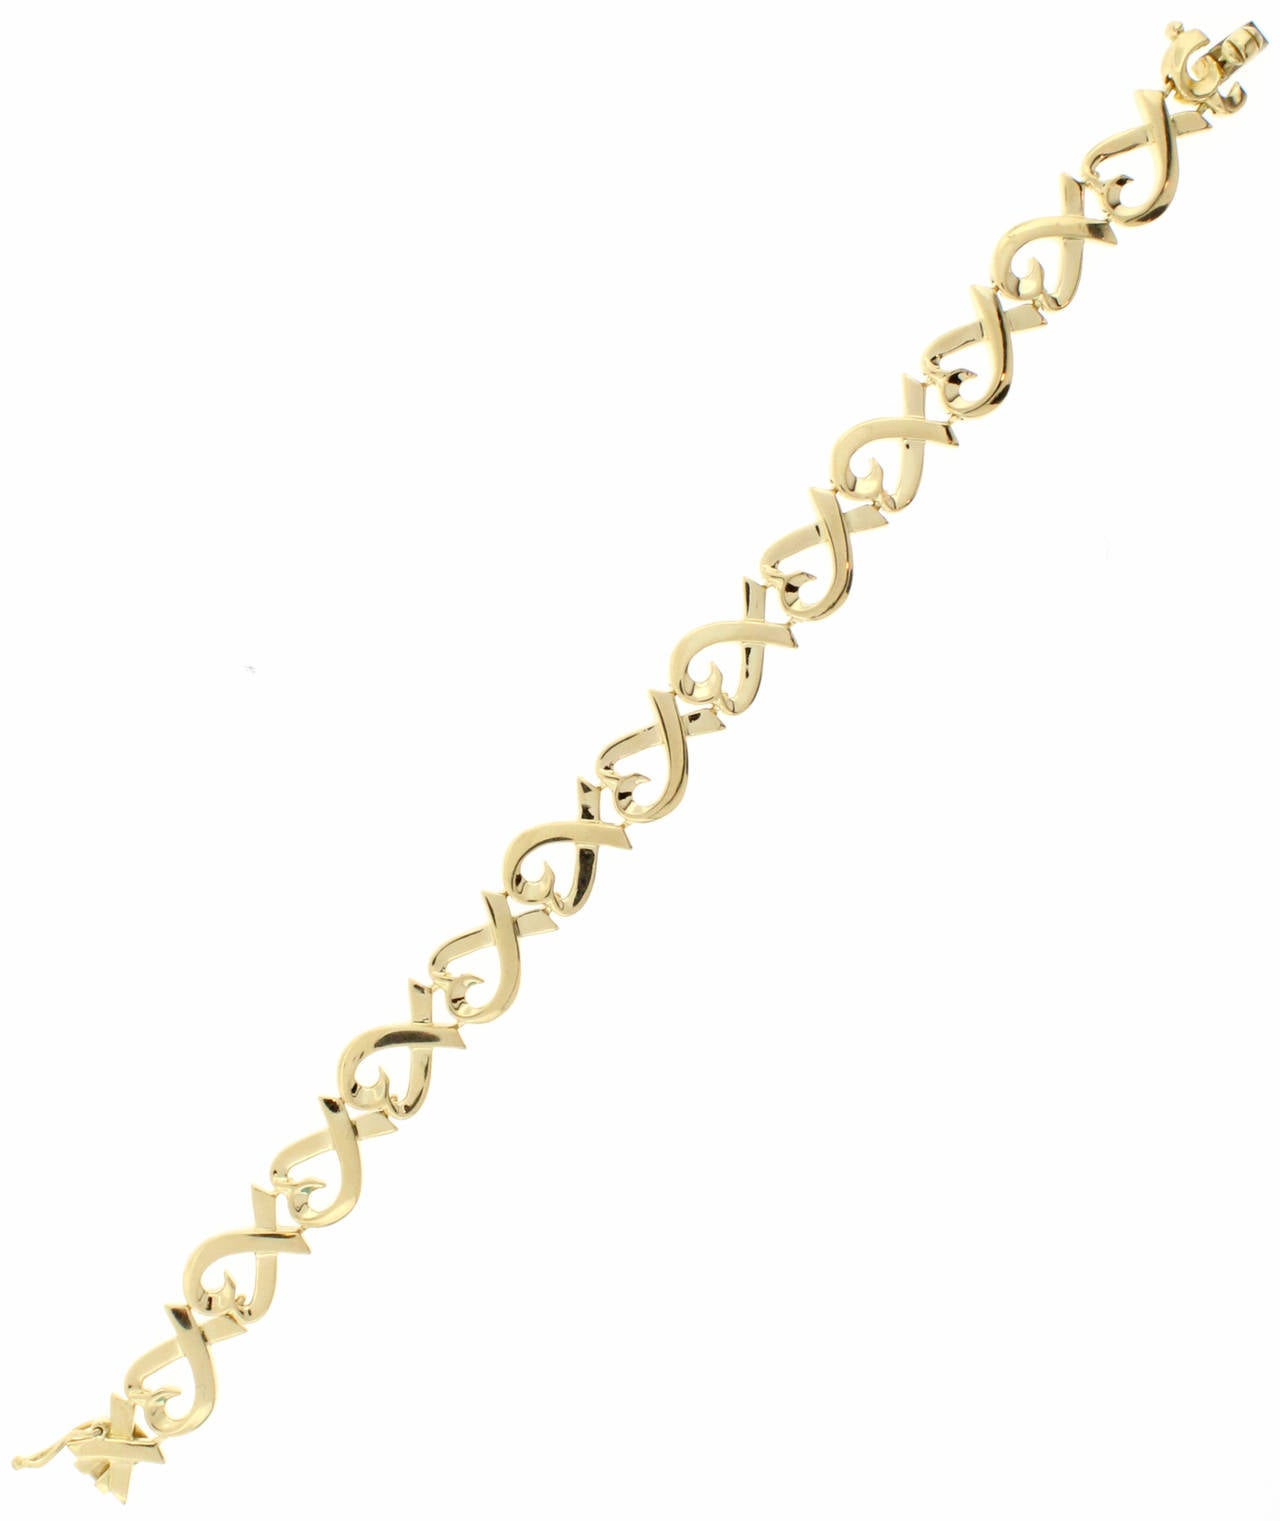 This Tiffany & Co. Paloma Picasso Loving Heart Bracelet is made of 18 karat yellow gold and is in excellent condition.